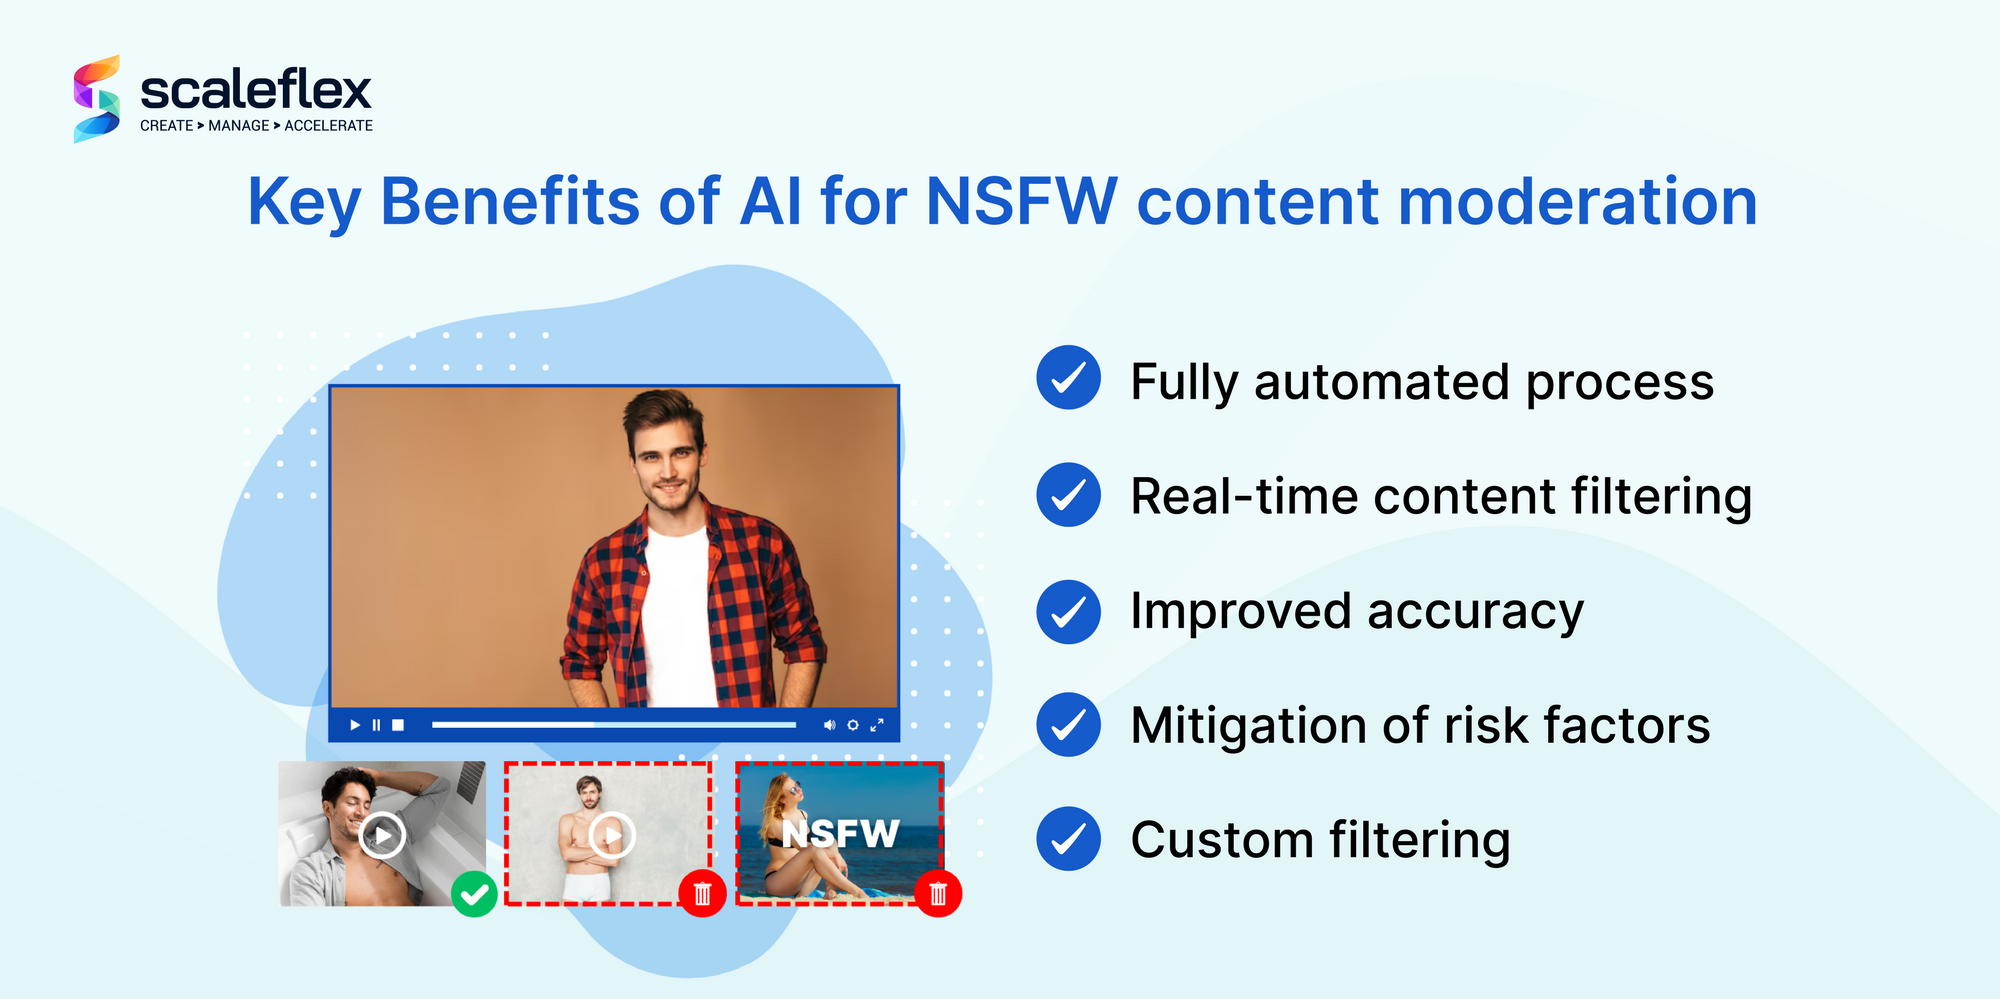 The benefits of AI for content moderation: automation, real-time action, accuracy, less risk and custom filter.